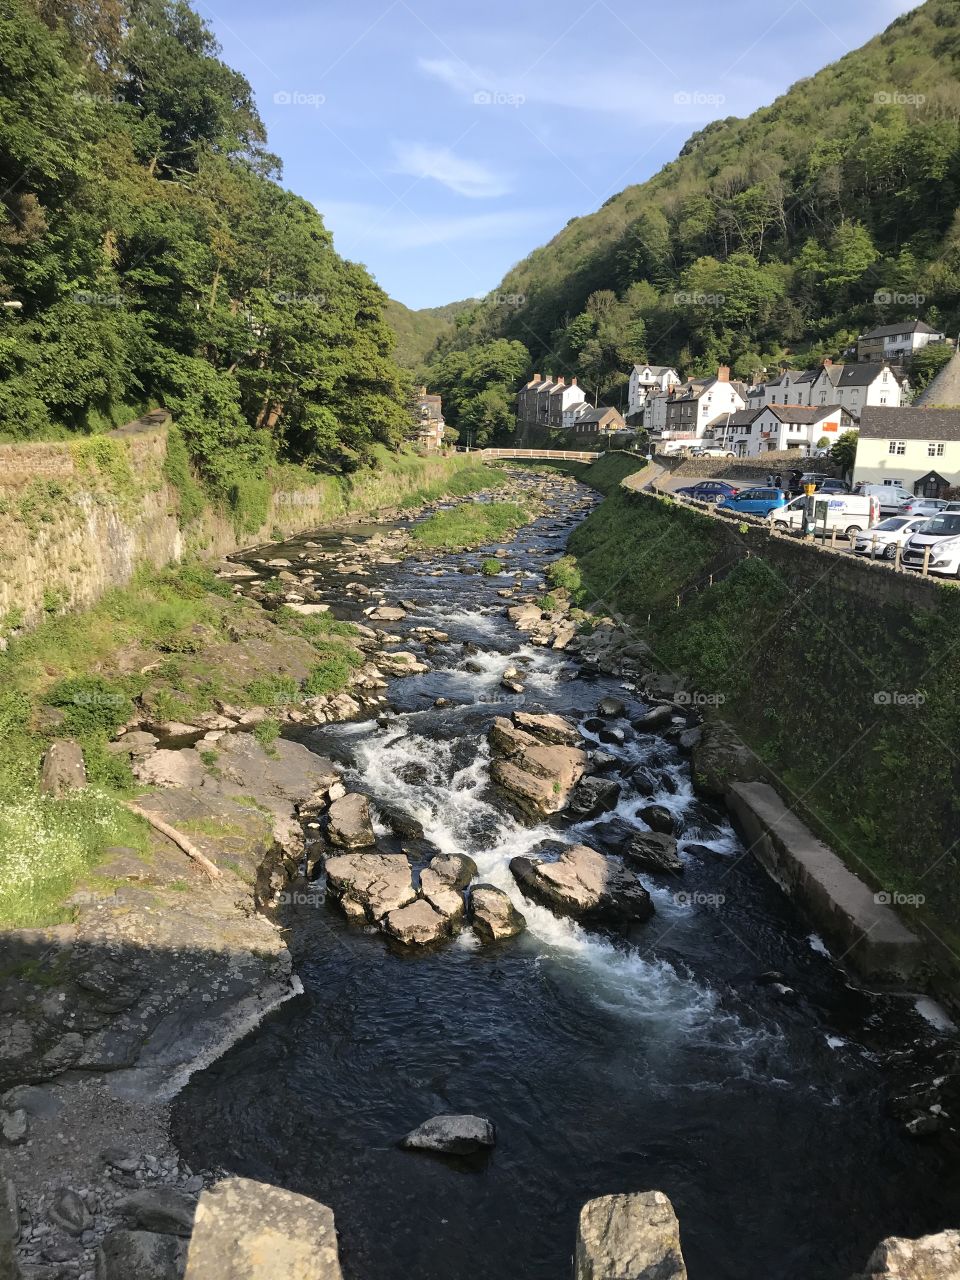 Lynmouth is a huge photo opportunity, but this photo ticks all your wishes, topped up with the sun popping in.